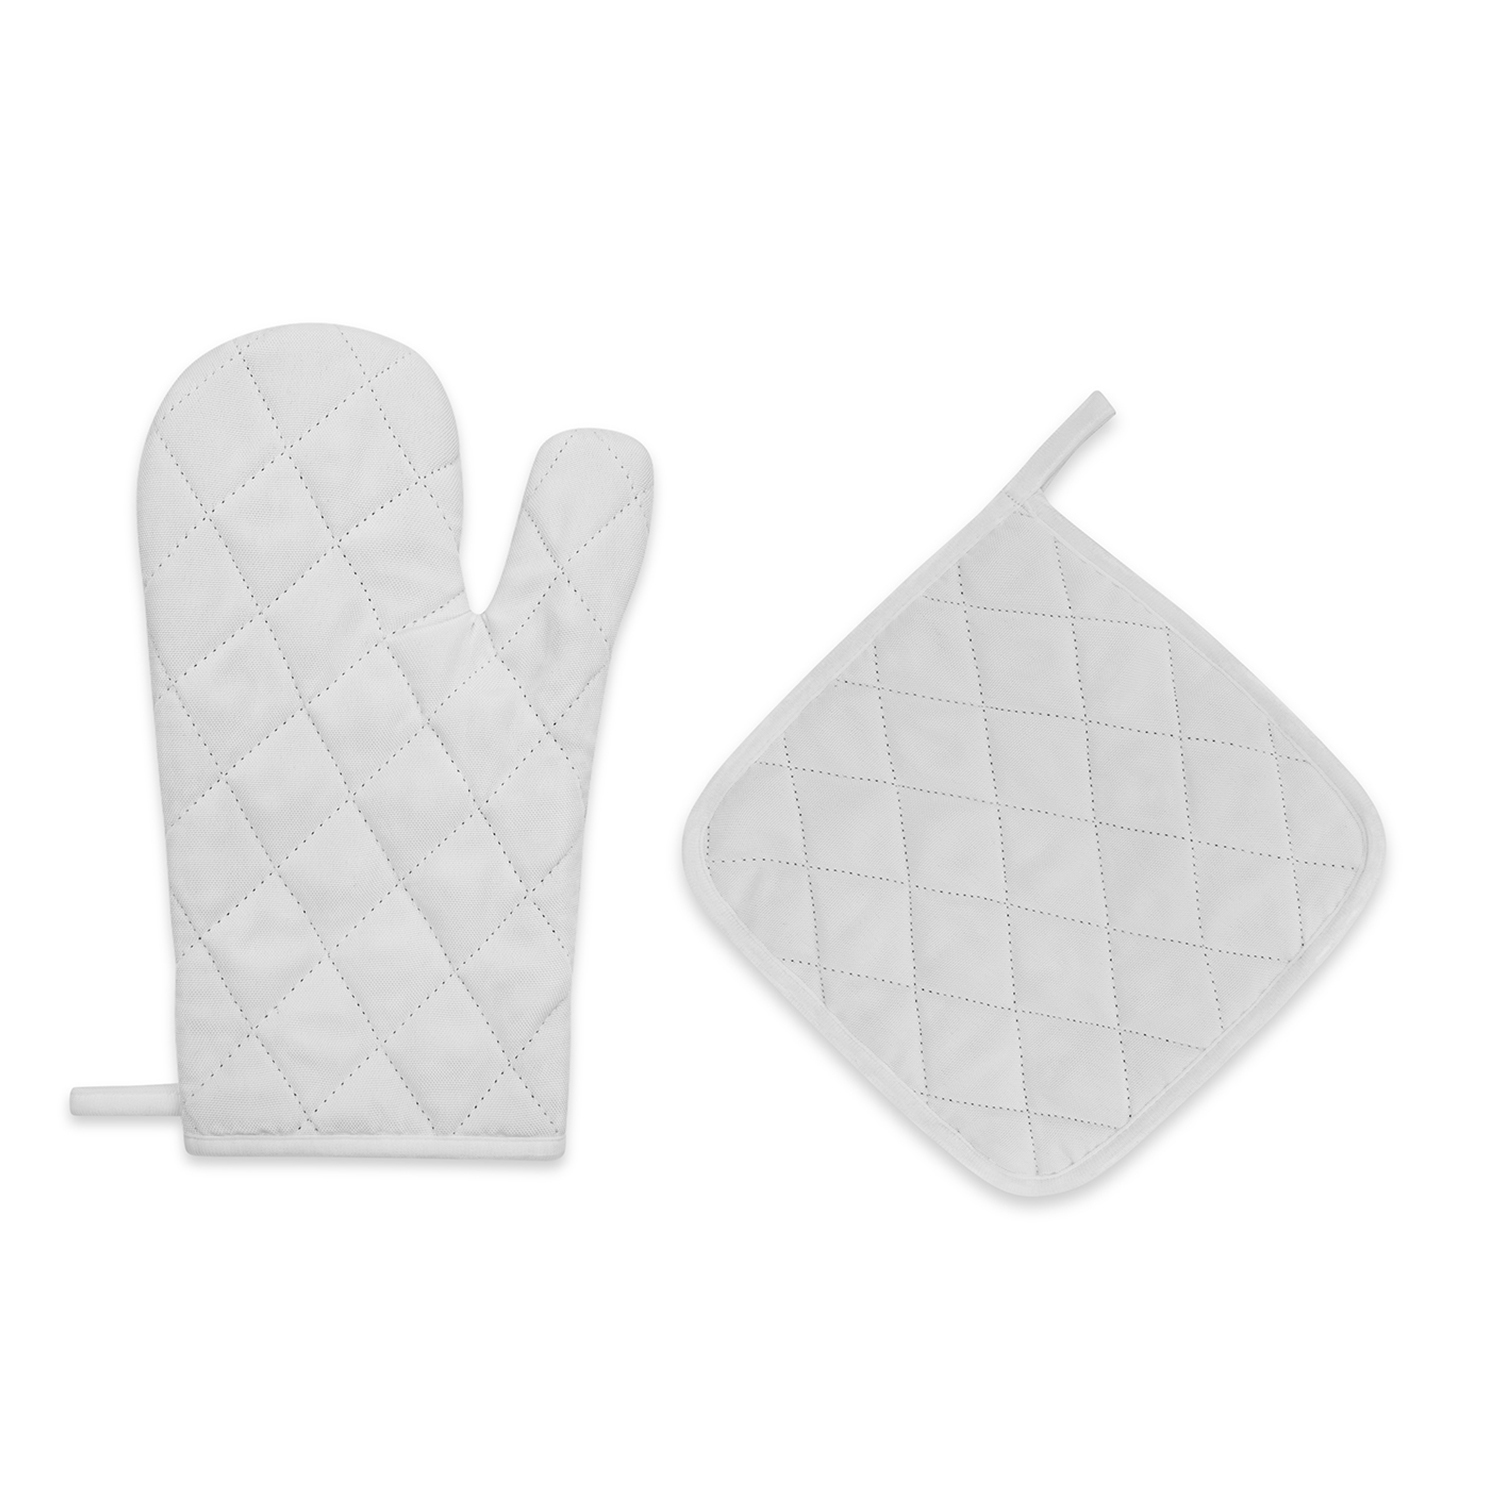 Microwave Oven Gloves & Insulation Pad | HugePOD-1